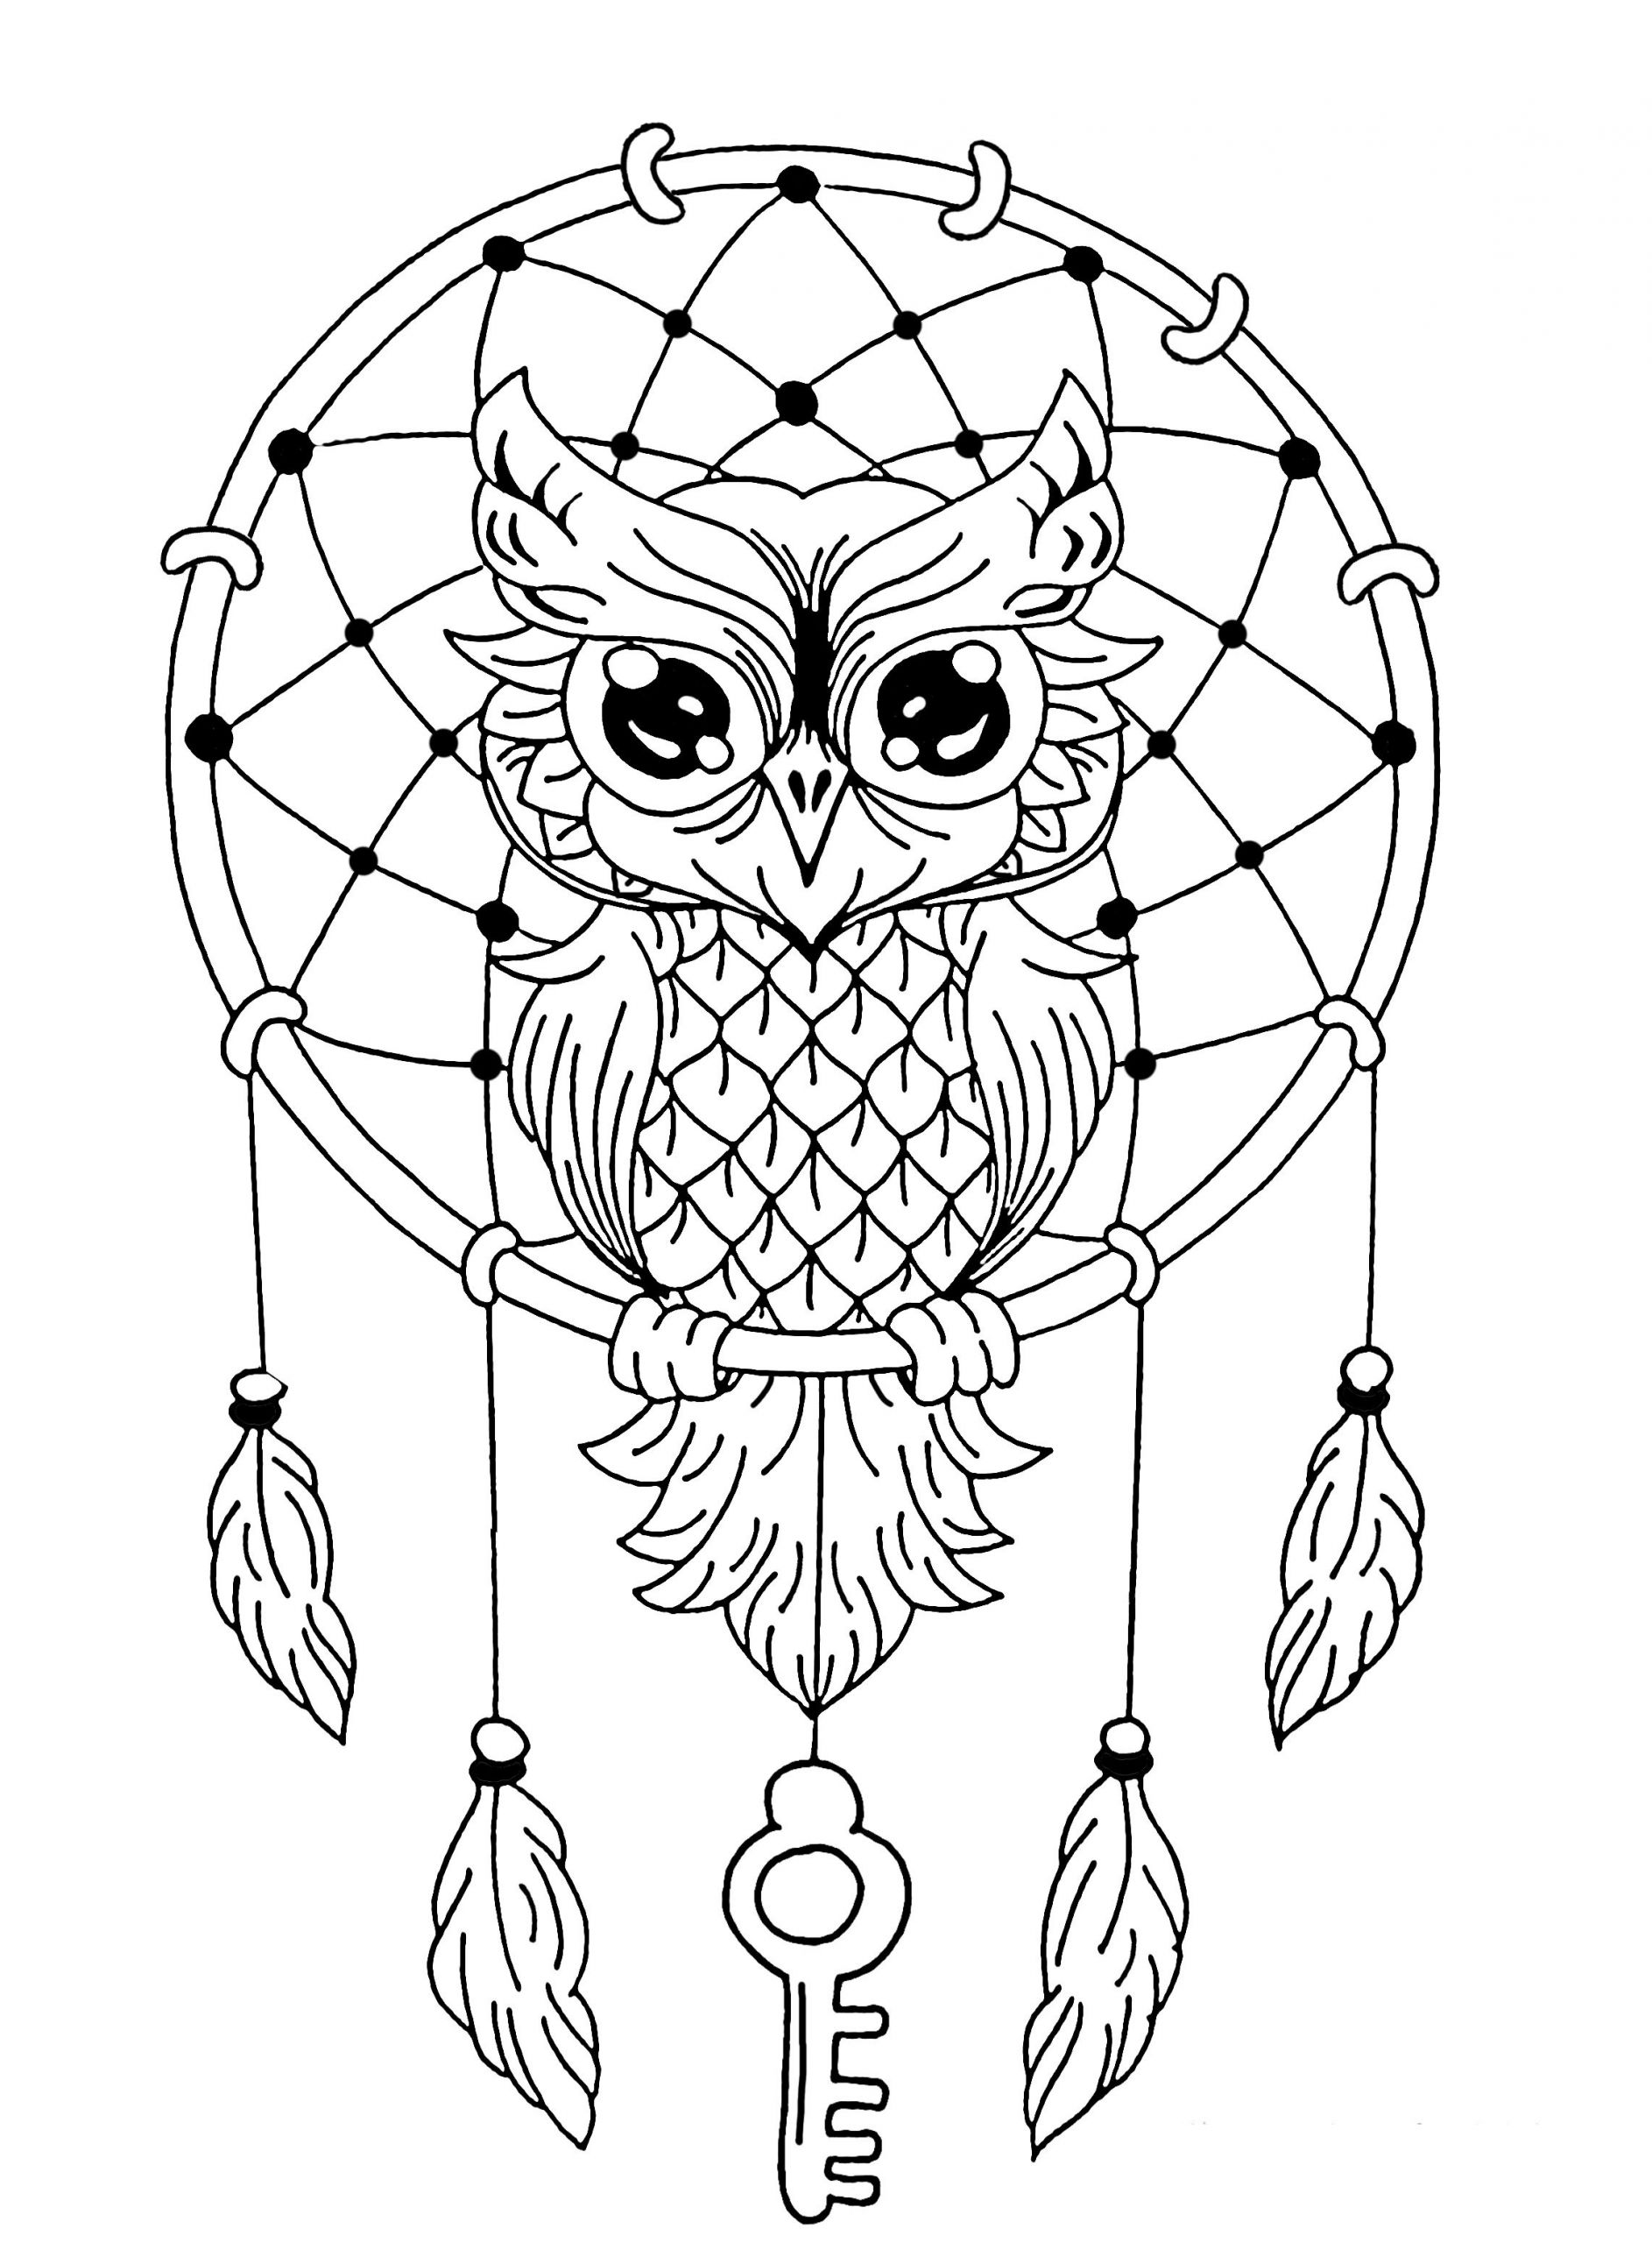 Owl Coloring Pages For Girls
 Owl dreamcatcher Owls Adult Coloring Pages